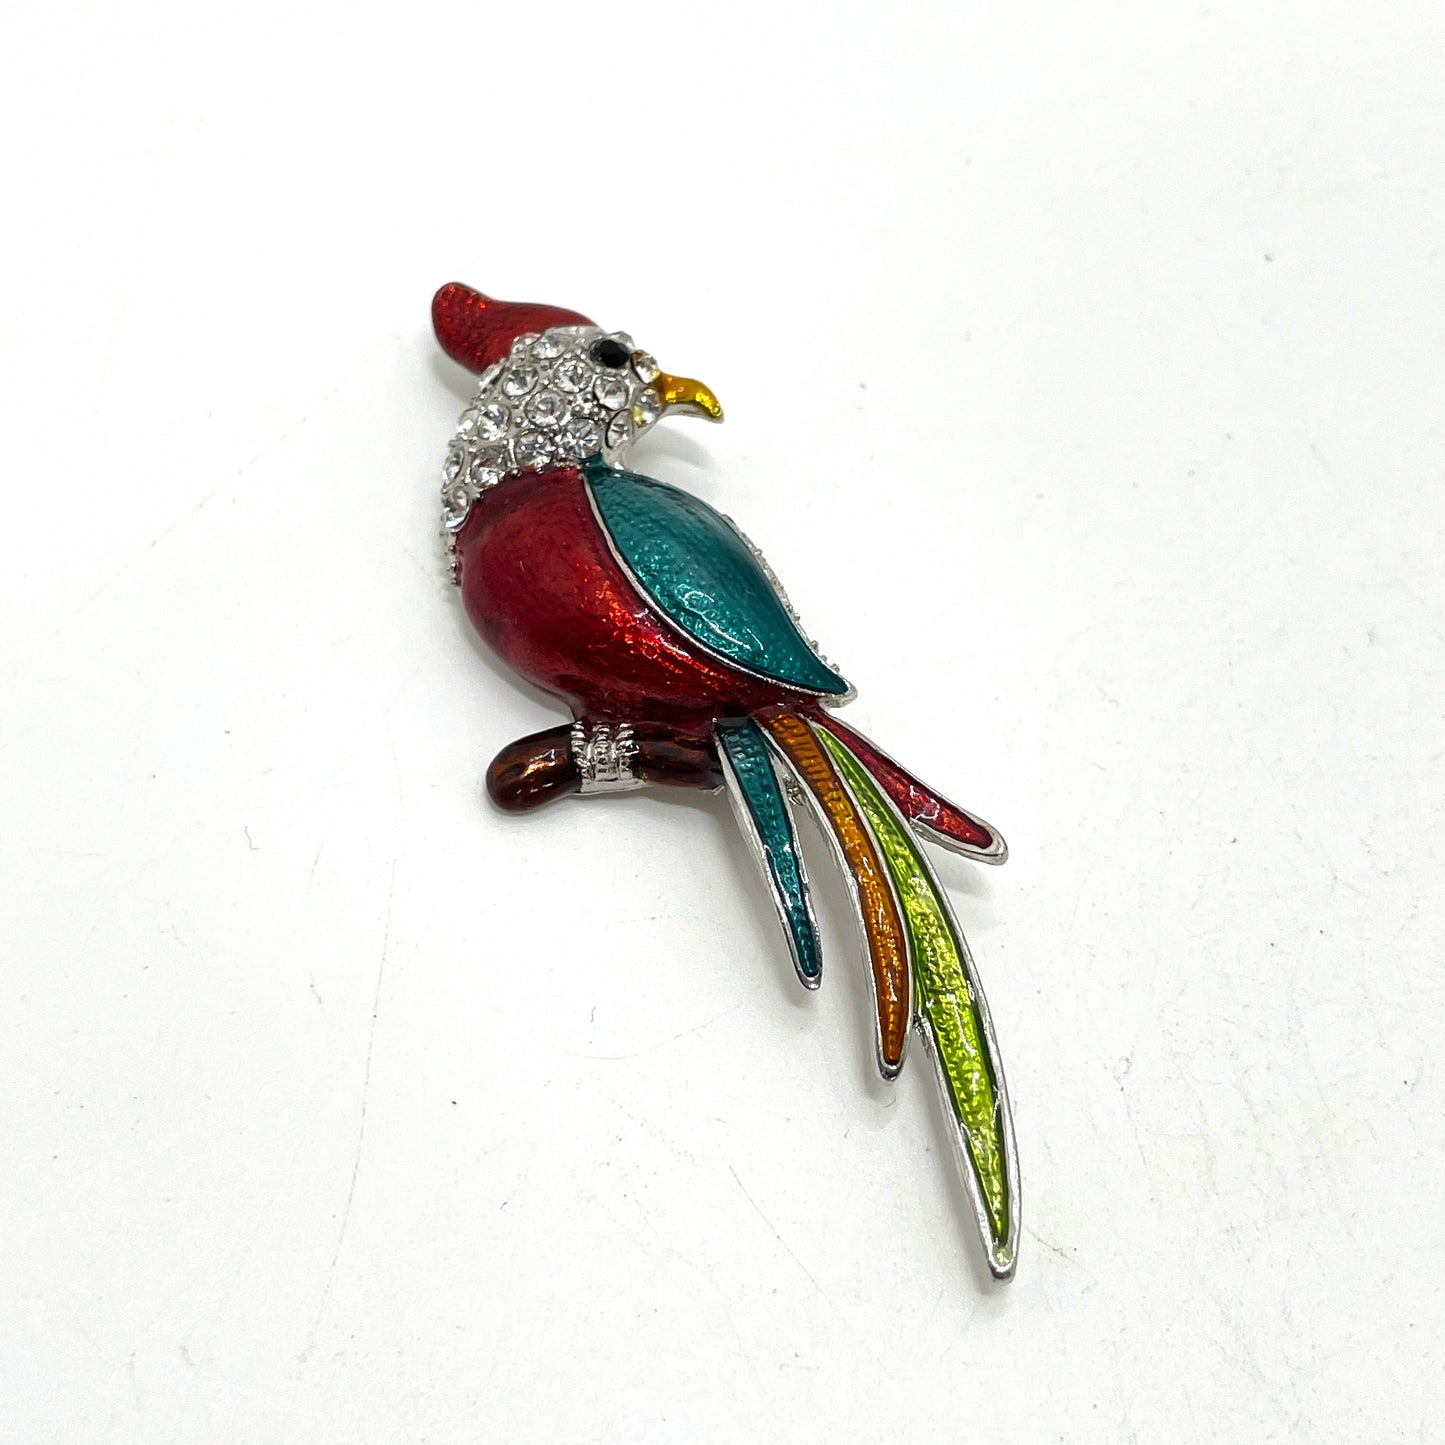 Enamel Parrot Pin with Crystals